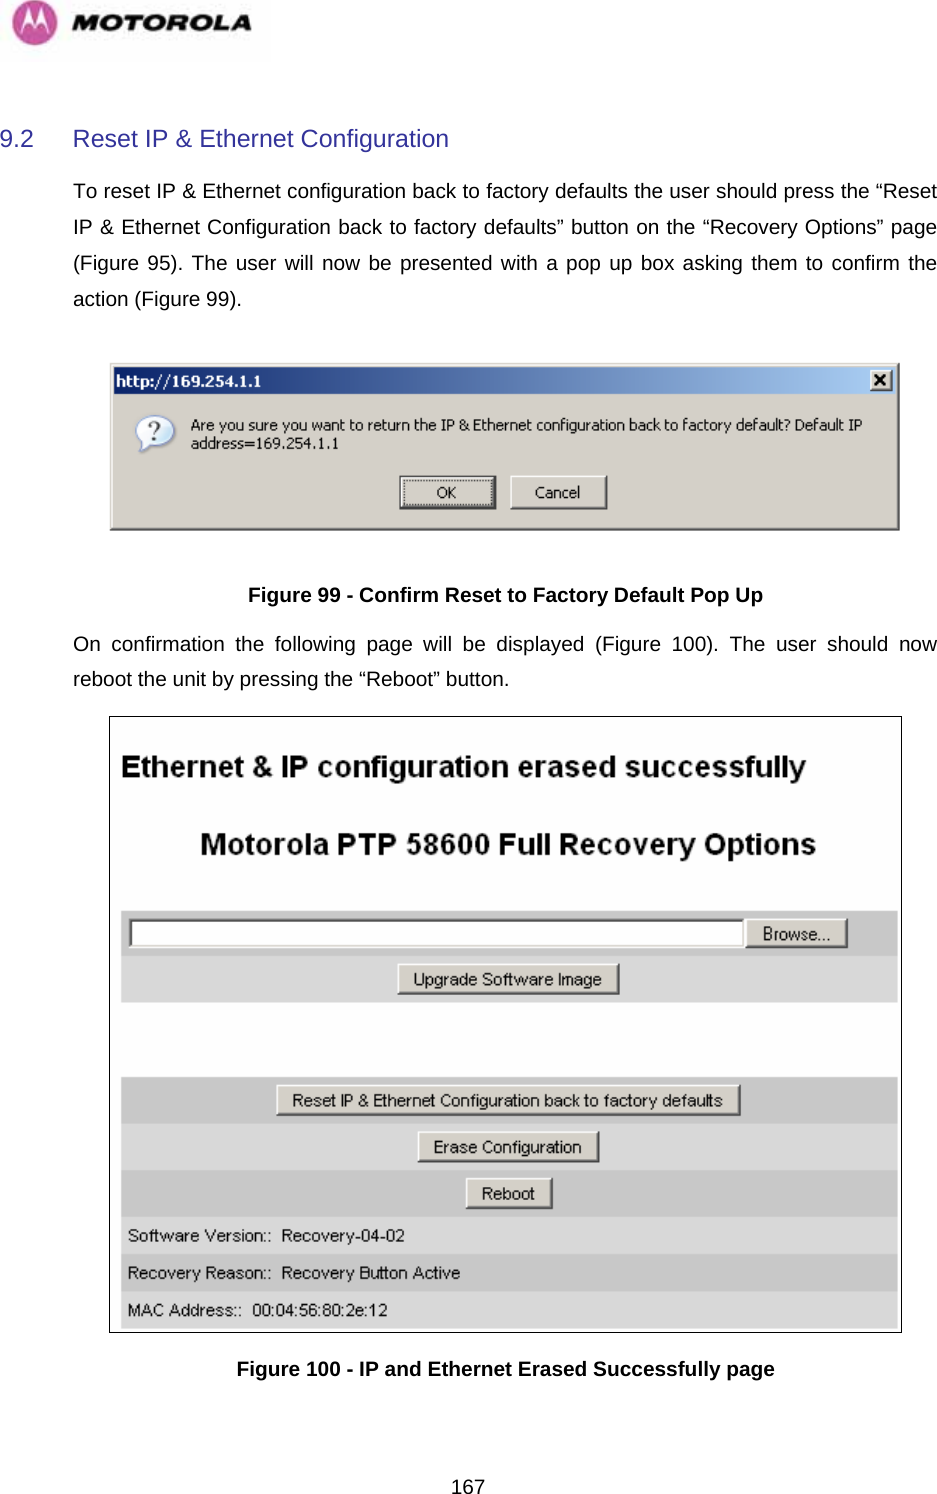   1679.2  Reset IP &amp; Ethernet Configuration To reset IP &amp; Ethernet configuration back to factory defaults the user should press the “Reset IP &amp; Ethernet Configuration back to factory defaults” button on the “Recovery Options” page (Figure 95). The user will now be presented with a pop up box asking them to confirm the action (Figure 99).  Figure 99 - Confirm Reset to Factory Default Pop Up On confirmation the following page will be displayed (Figure 100). The user should now reboot the unit by pressing the “Reboot” button.  Figure 100 - IP and Ethernet Erased Successfully page 